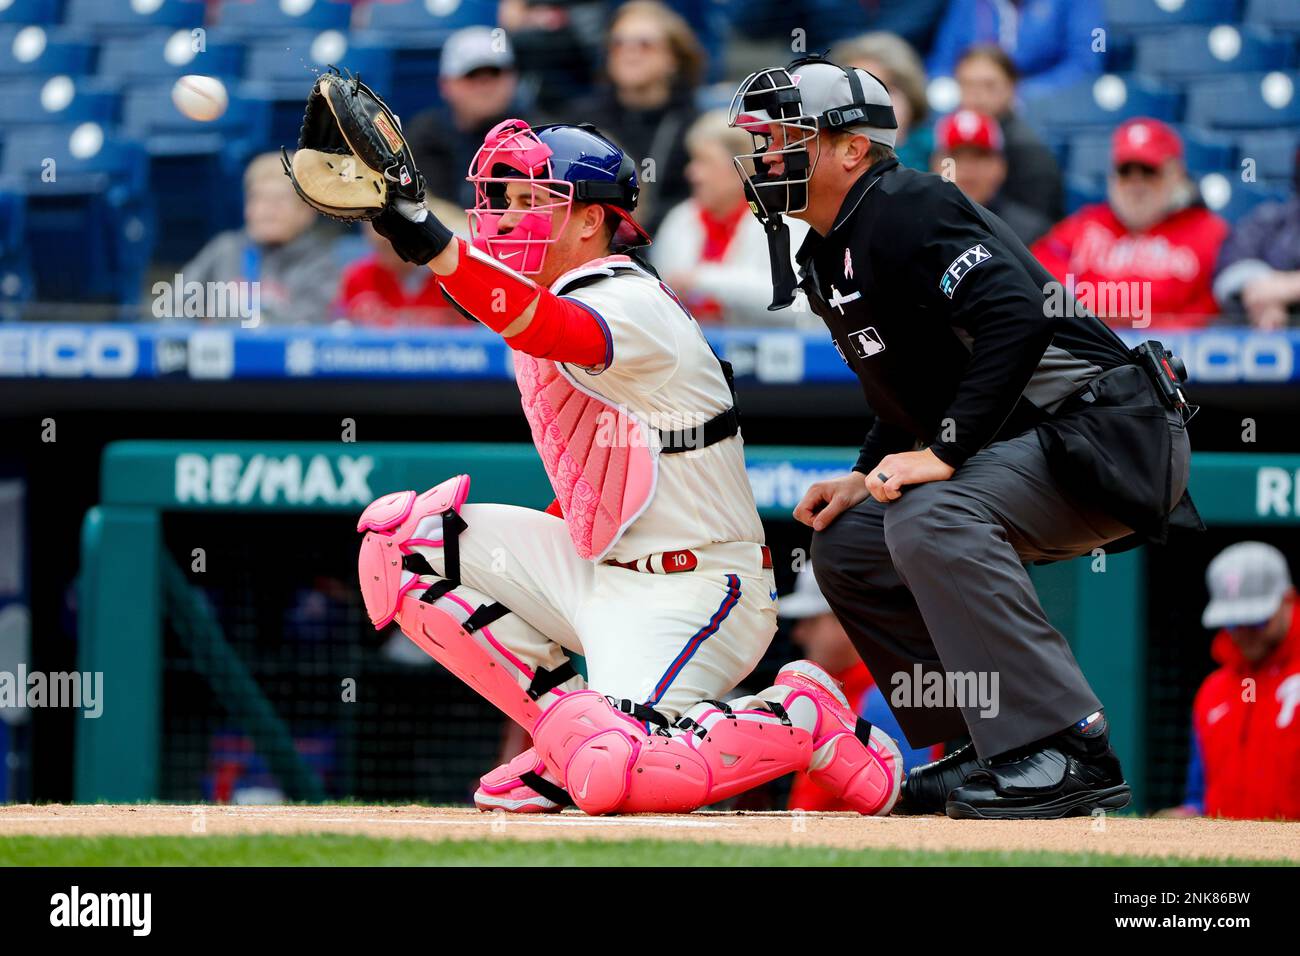 PHILADELPHIA, PA - MAY 08: Philadelphia Phillies catcher J.T. Realmuto (10)  in his pink Nike catchers gear on Mothers Day during the Major League  Baseball game between the Philadelphia Phillies and the